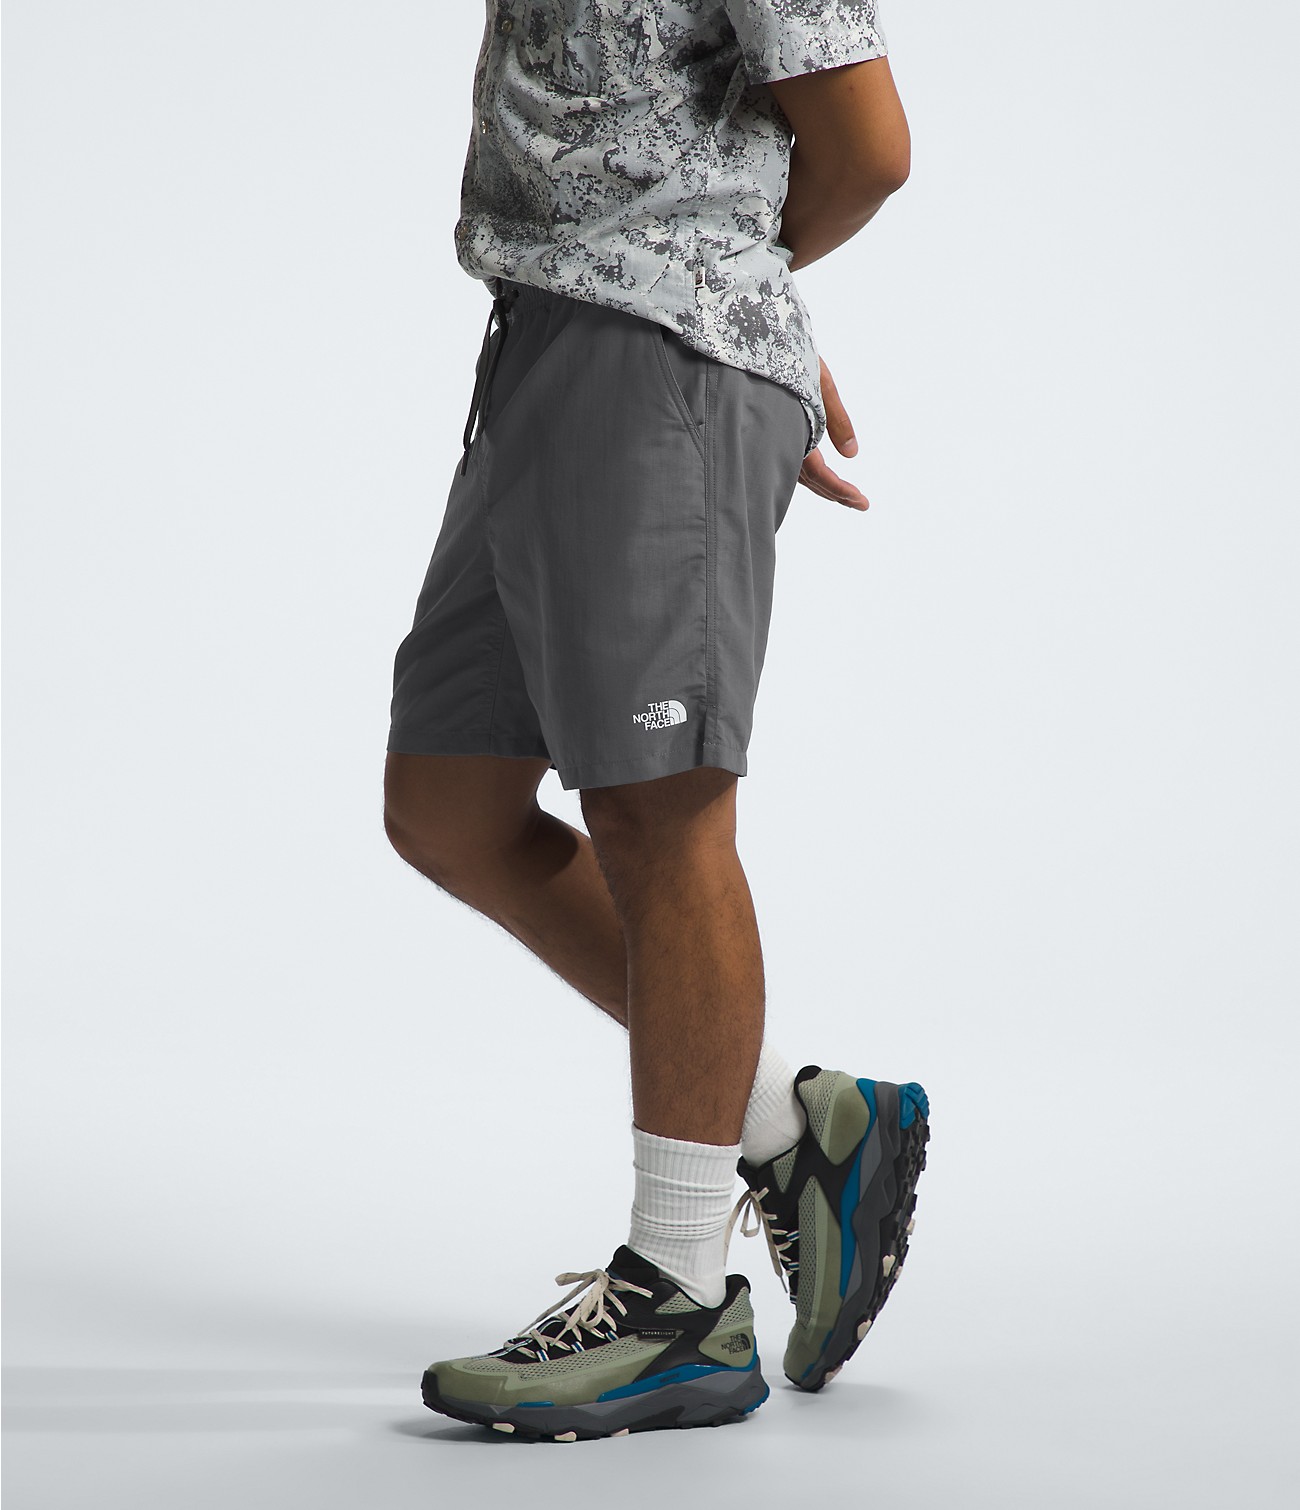 Men’s Action Shorts 2.0 | The North Face